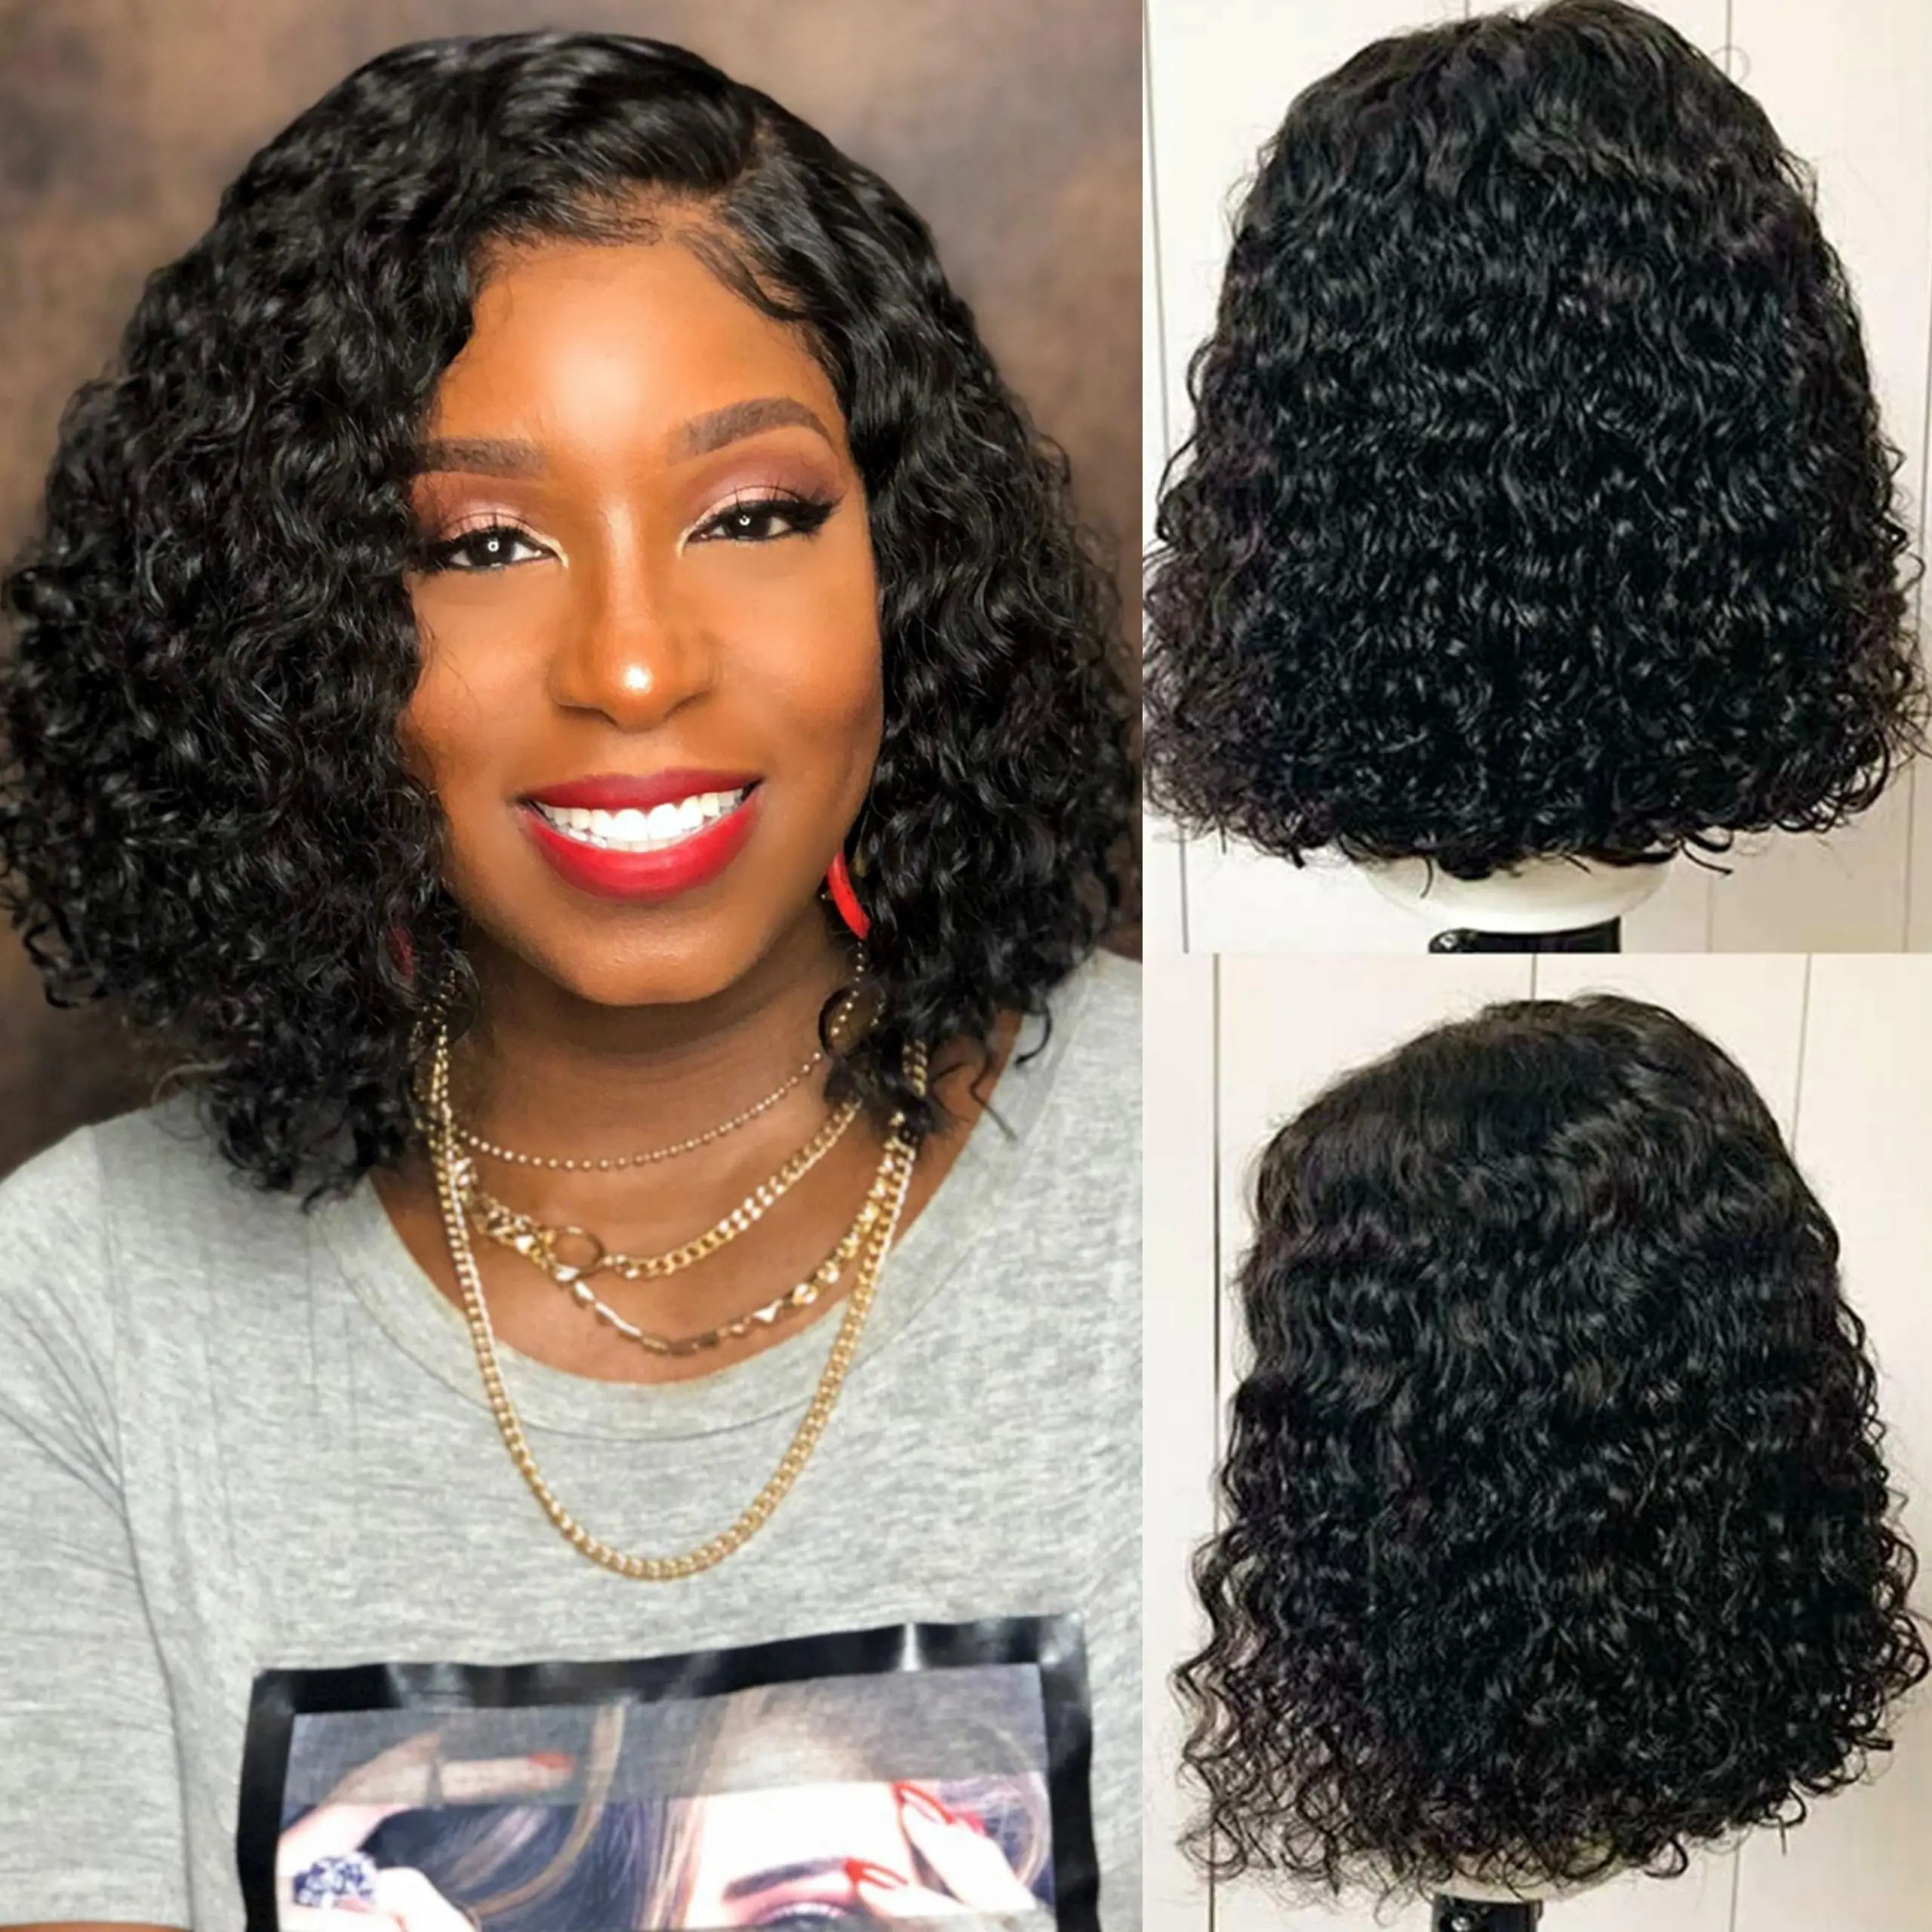 Scheherezade Short Curly Human Hair Wig Curly Bob Human Hair Lace Front Wigs for Women Preplucked Brazilian Remy Hair Baby hair